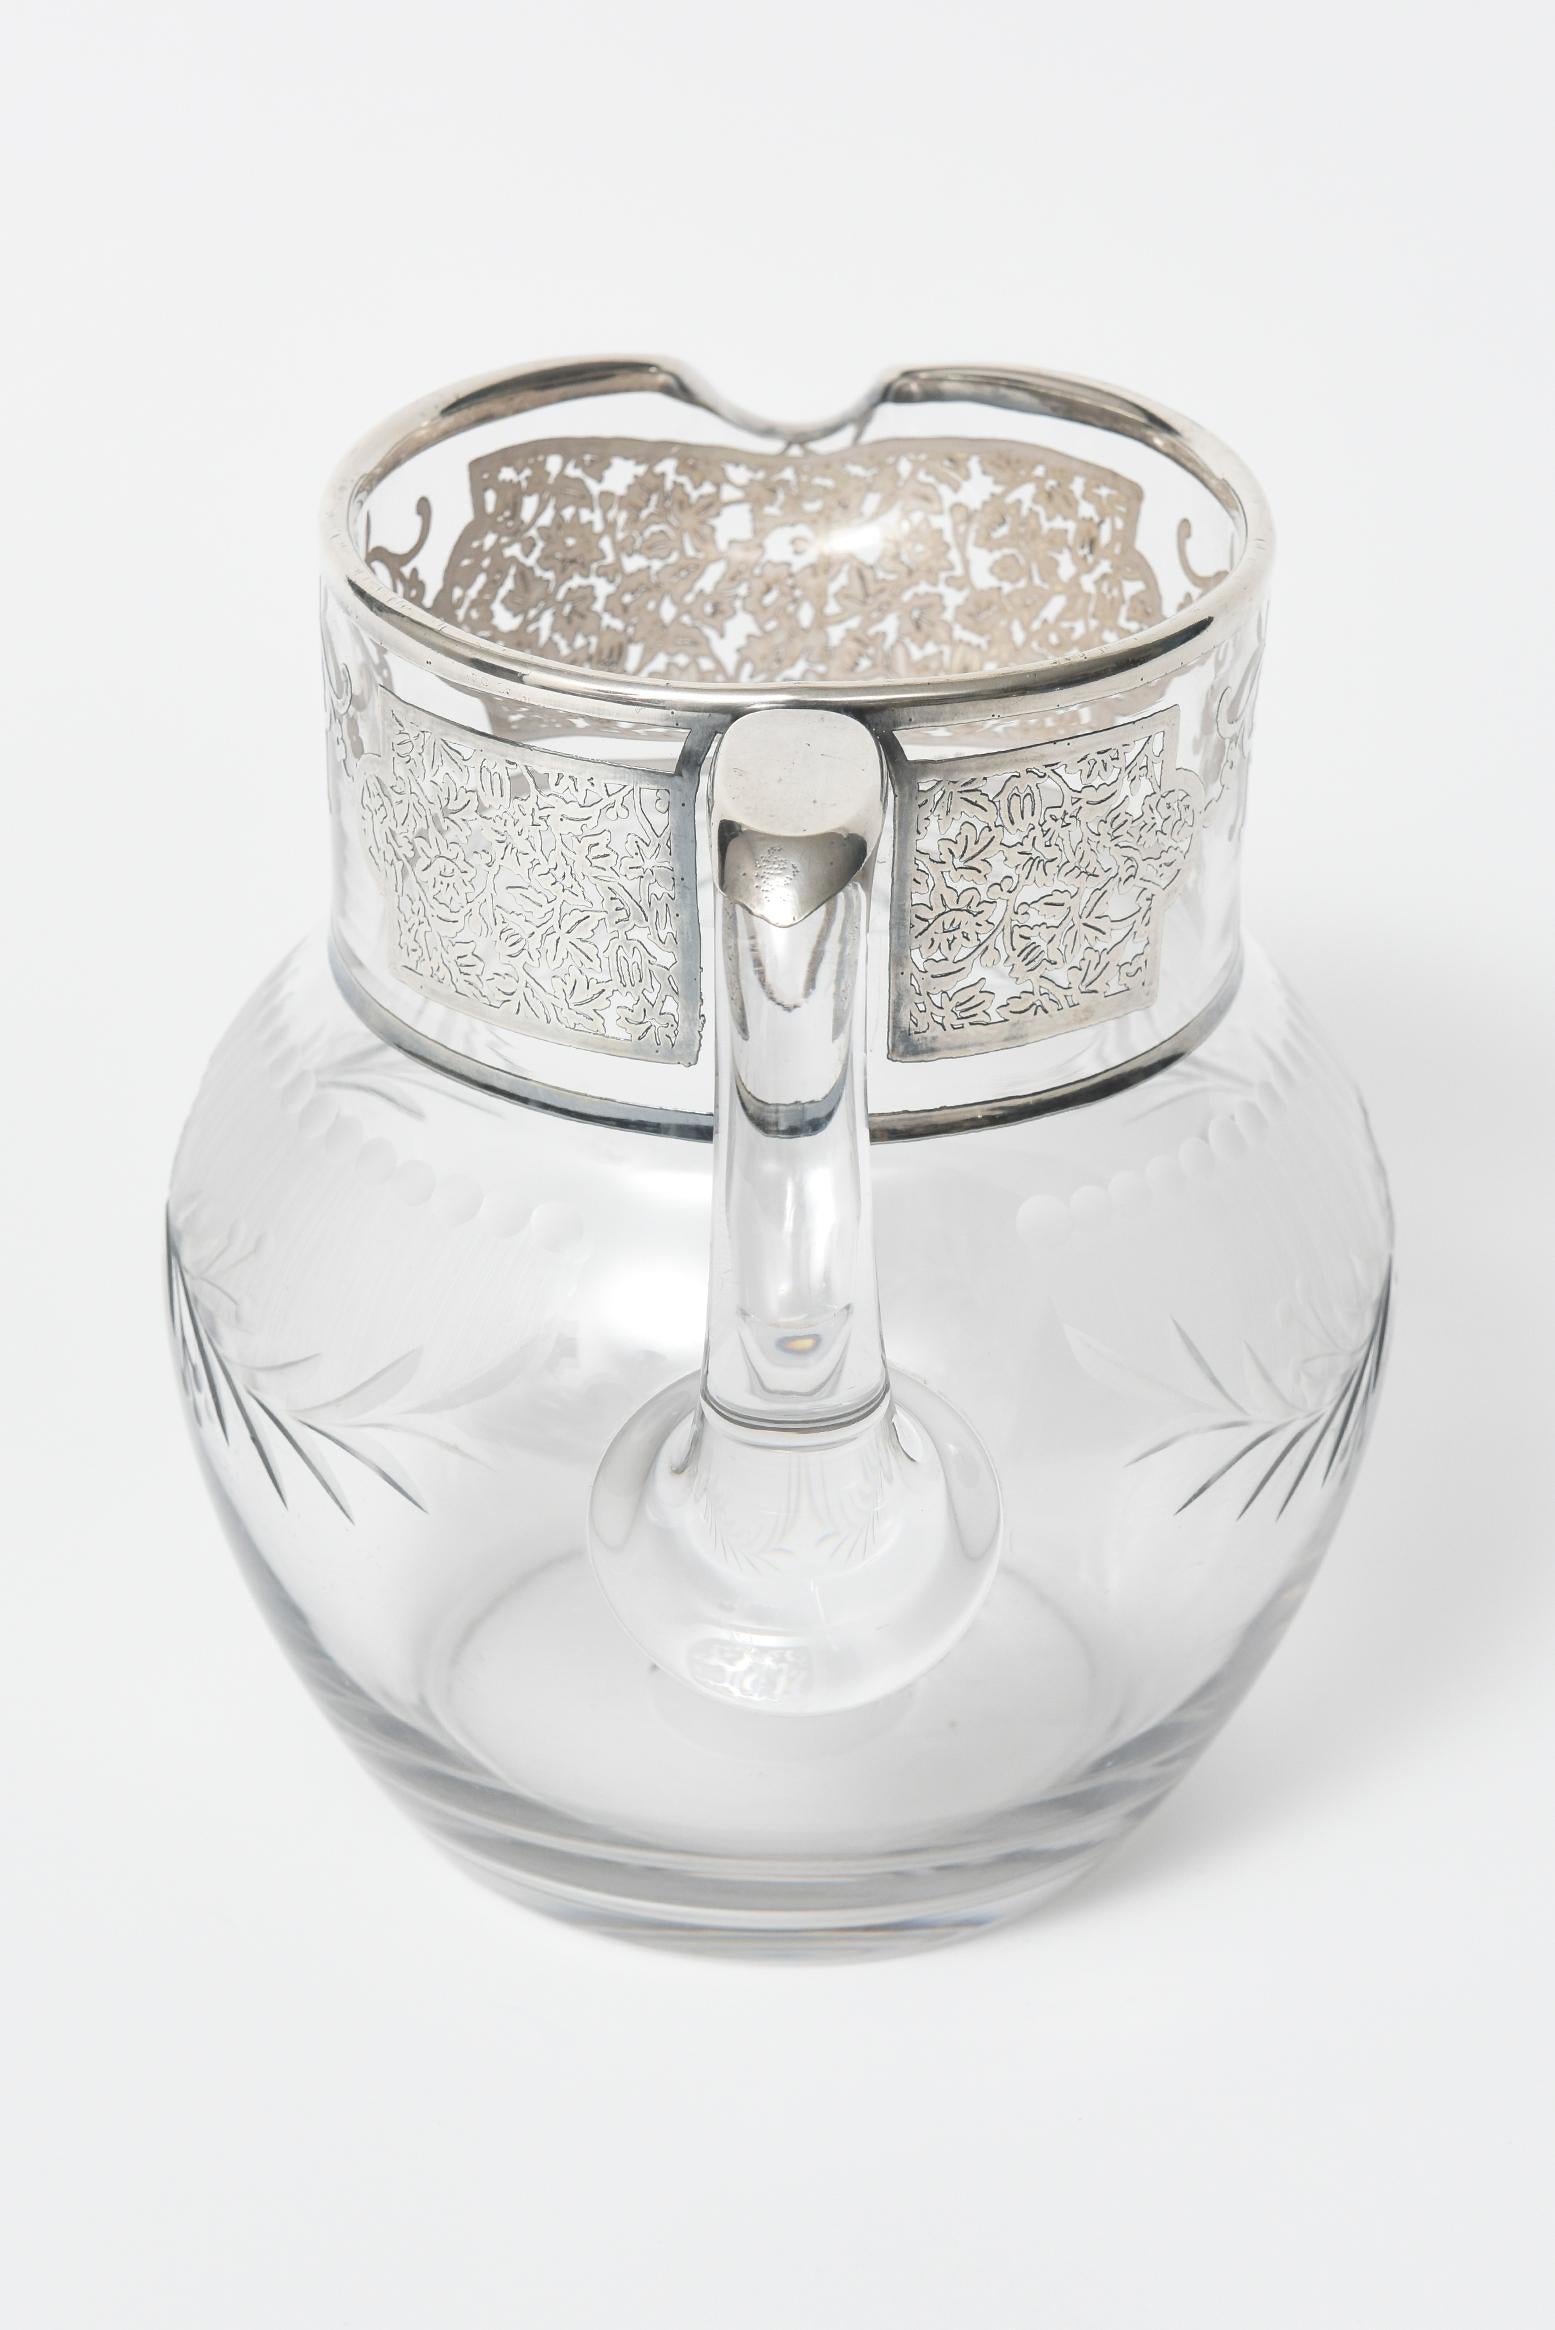 Silver Overlay Floral Etched Clear Glass Water Pitcher Jug Decanter For Sale 4